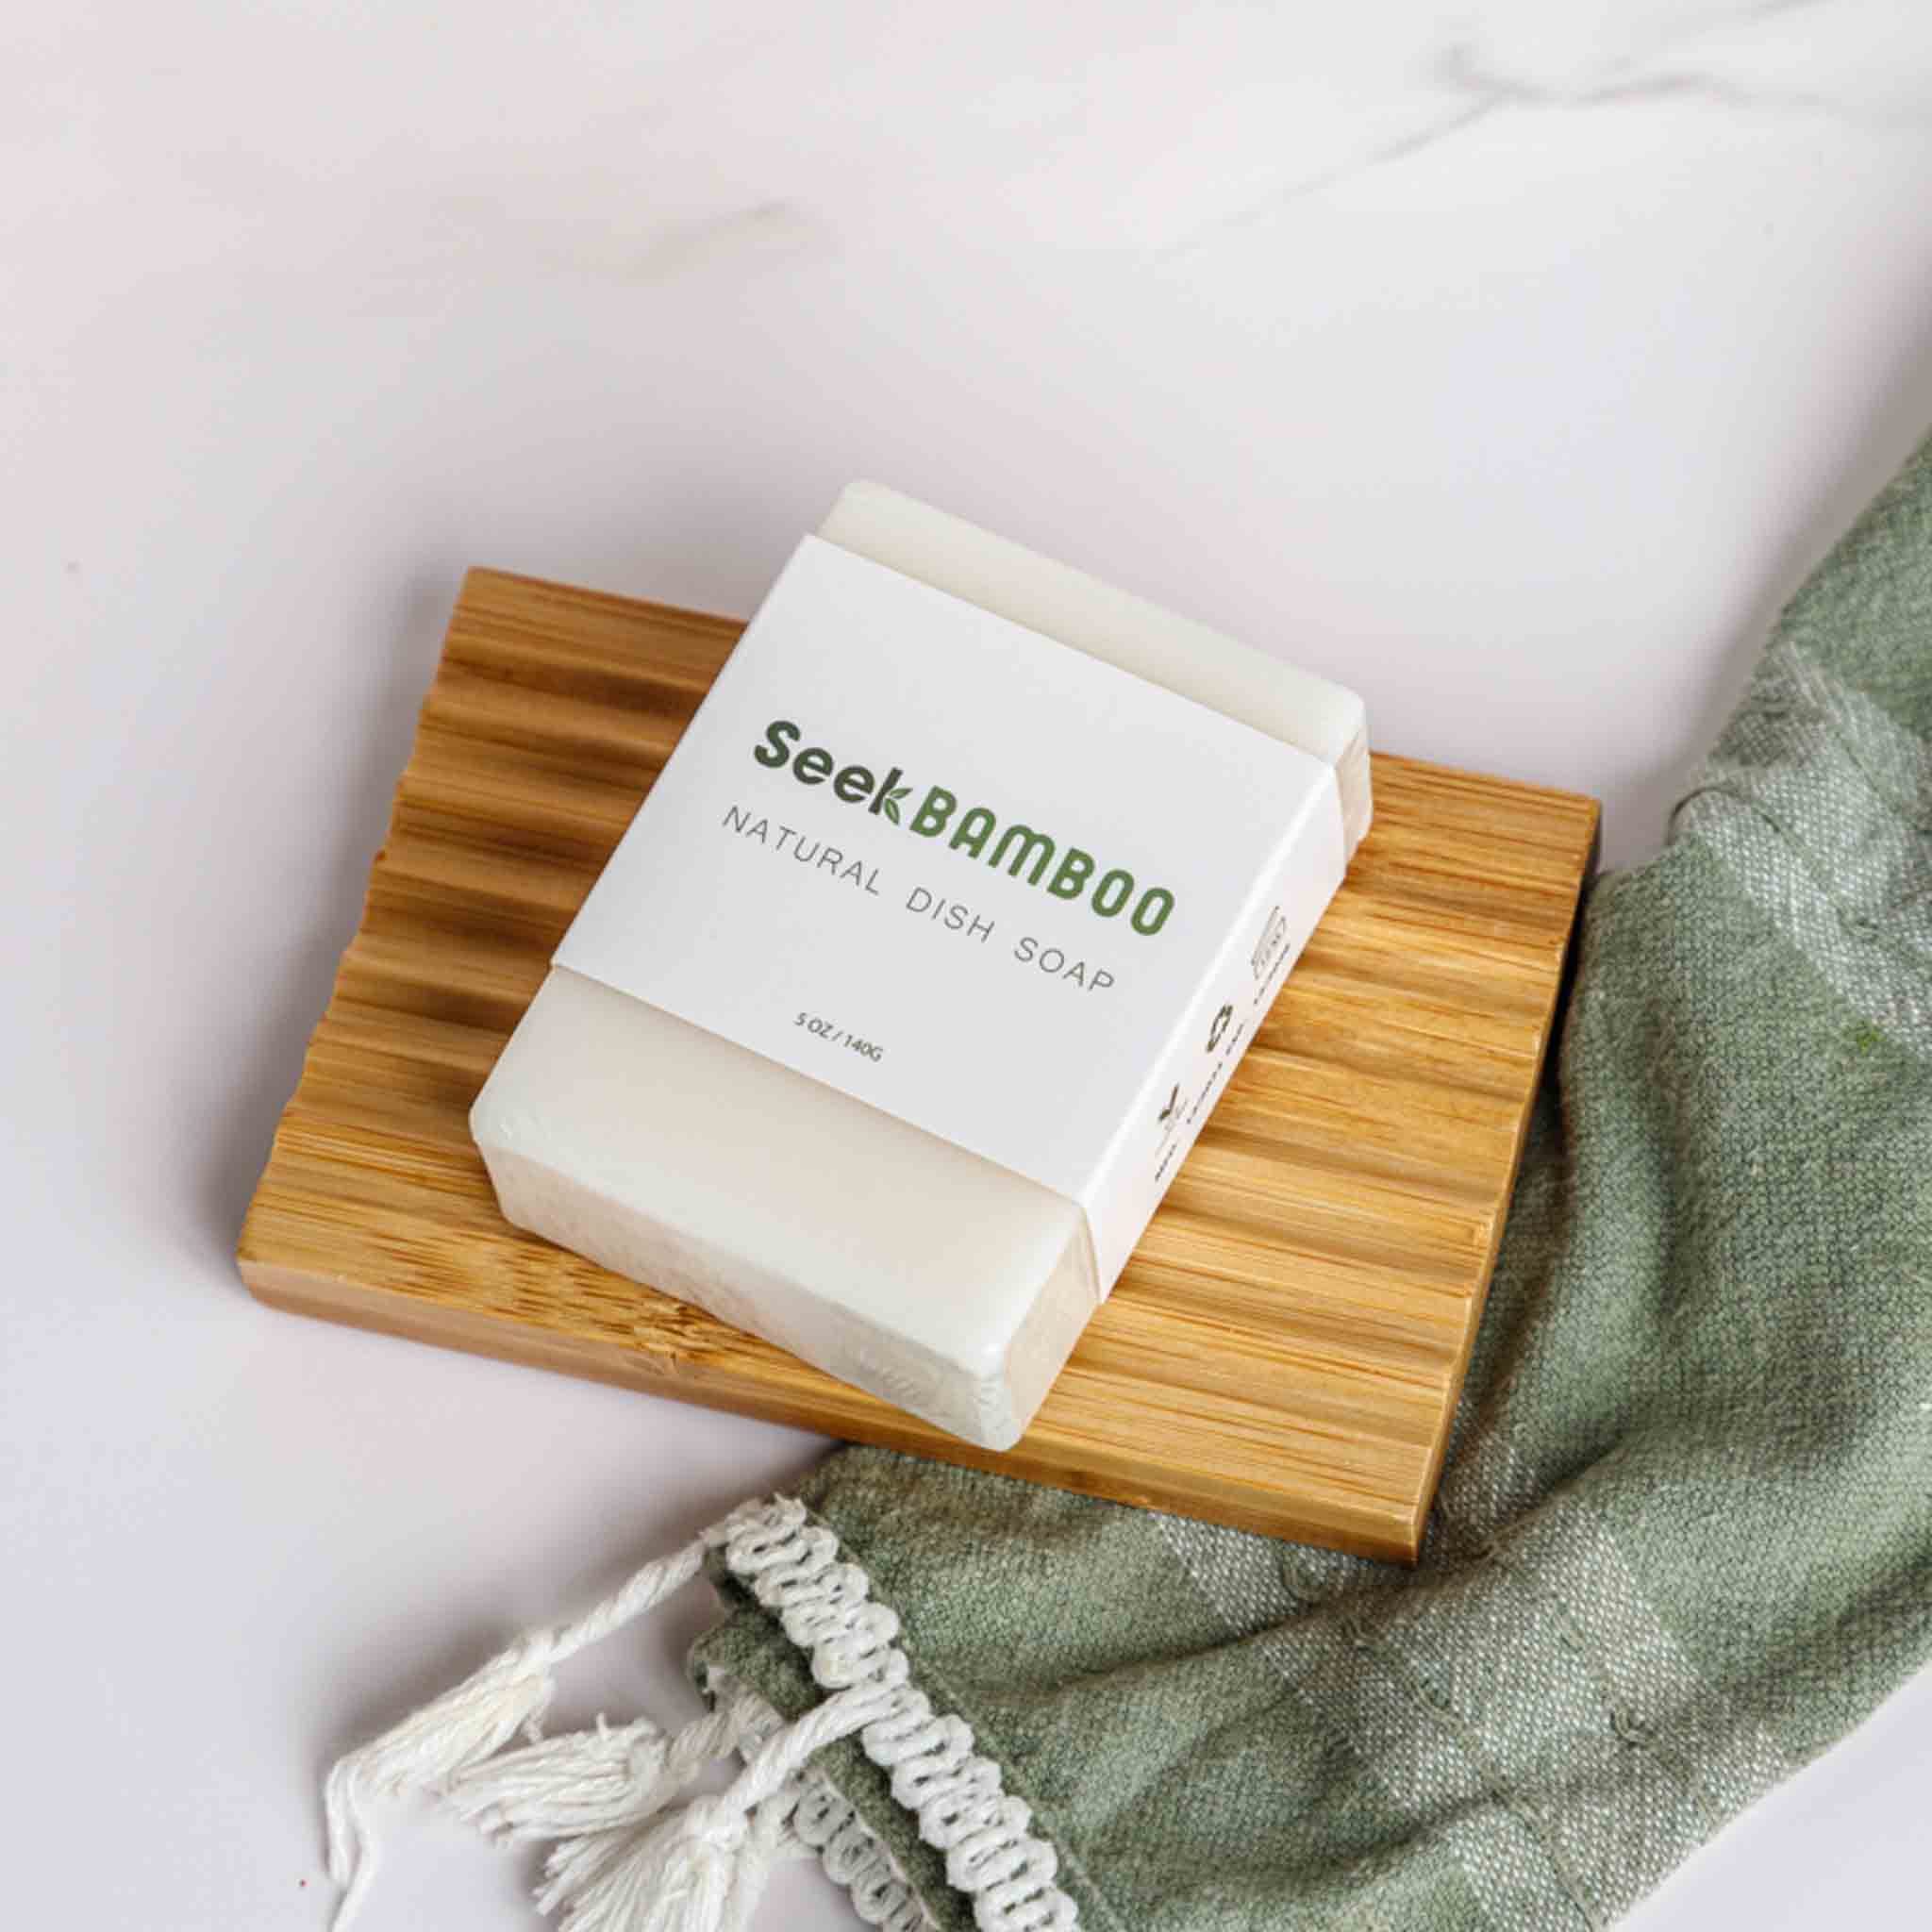 zero waste cleaning - dish soap bar